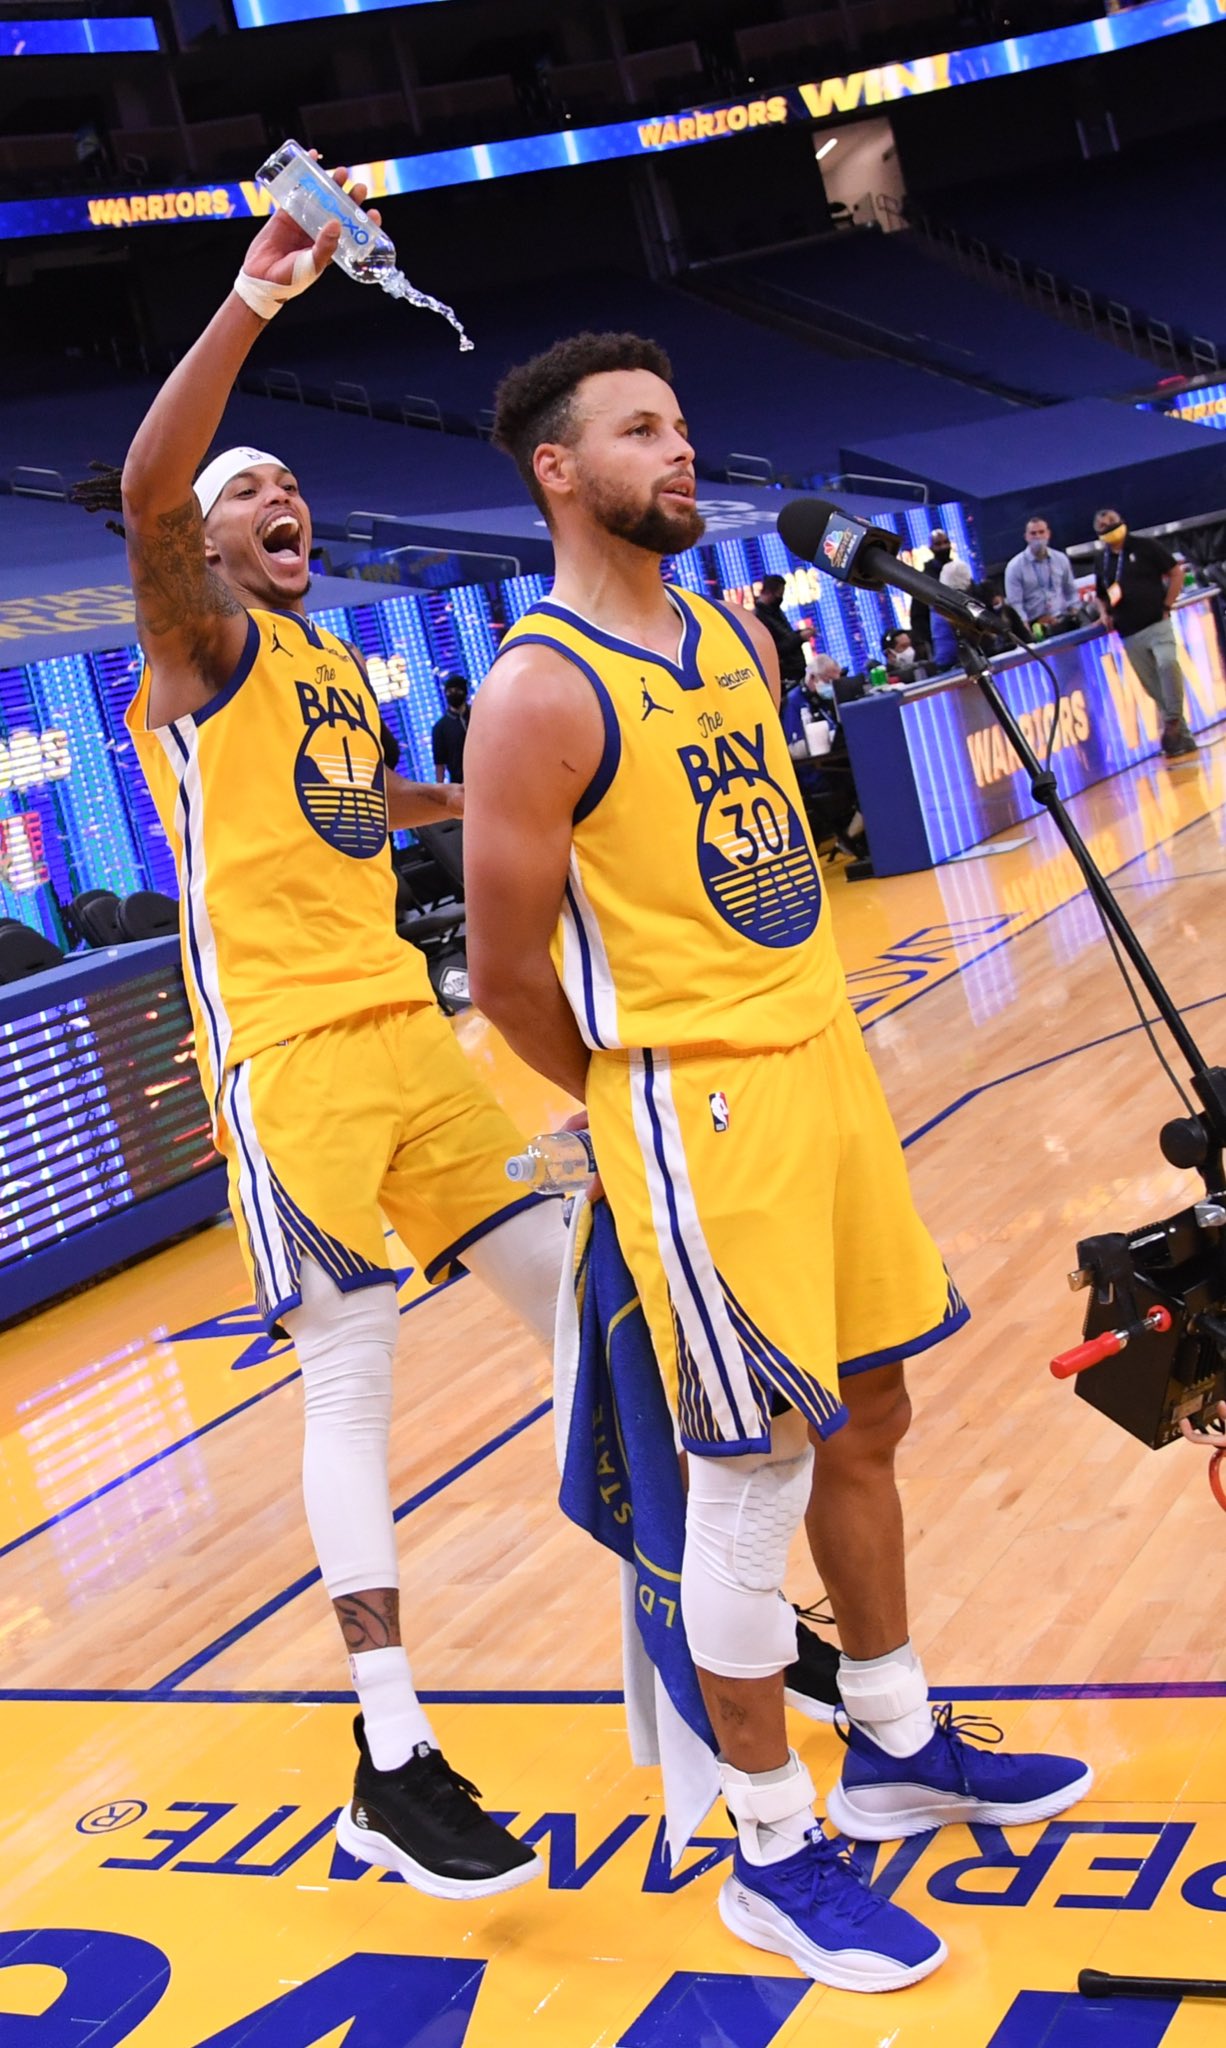 Why Does Steph Curry Wear One Sleeve? Find out Here!